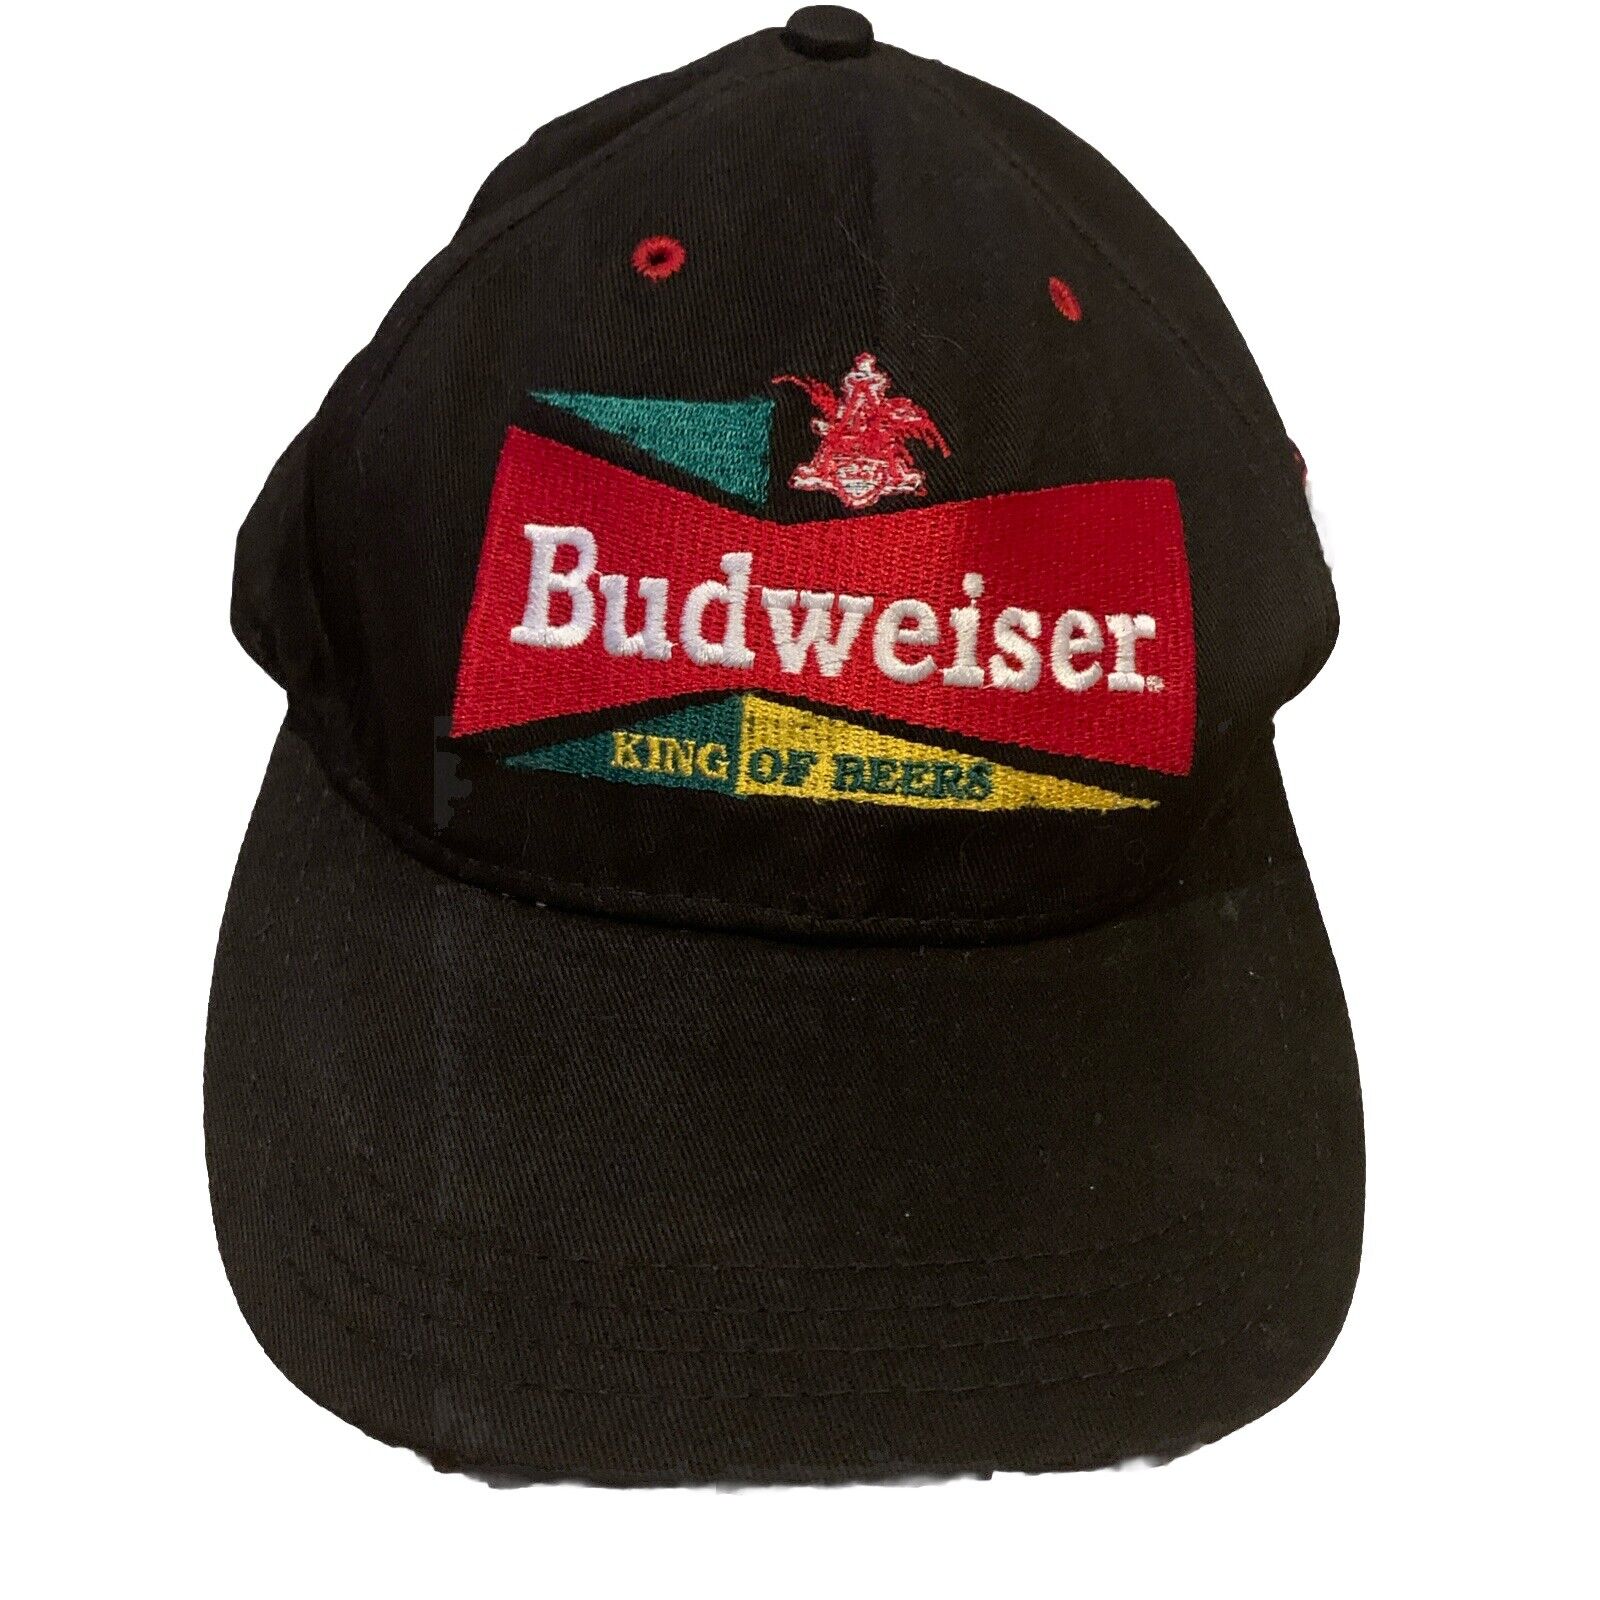 Budweiser King of Beers 1957 retro Series Hat Vintage Black made in USA RARE